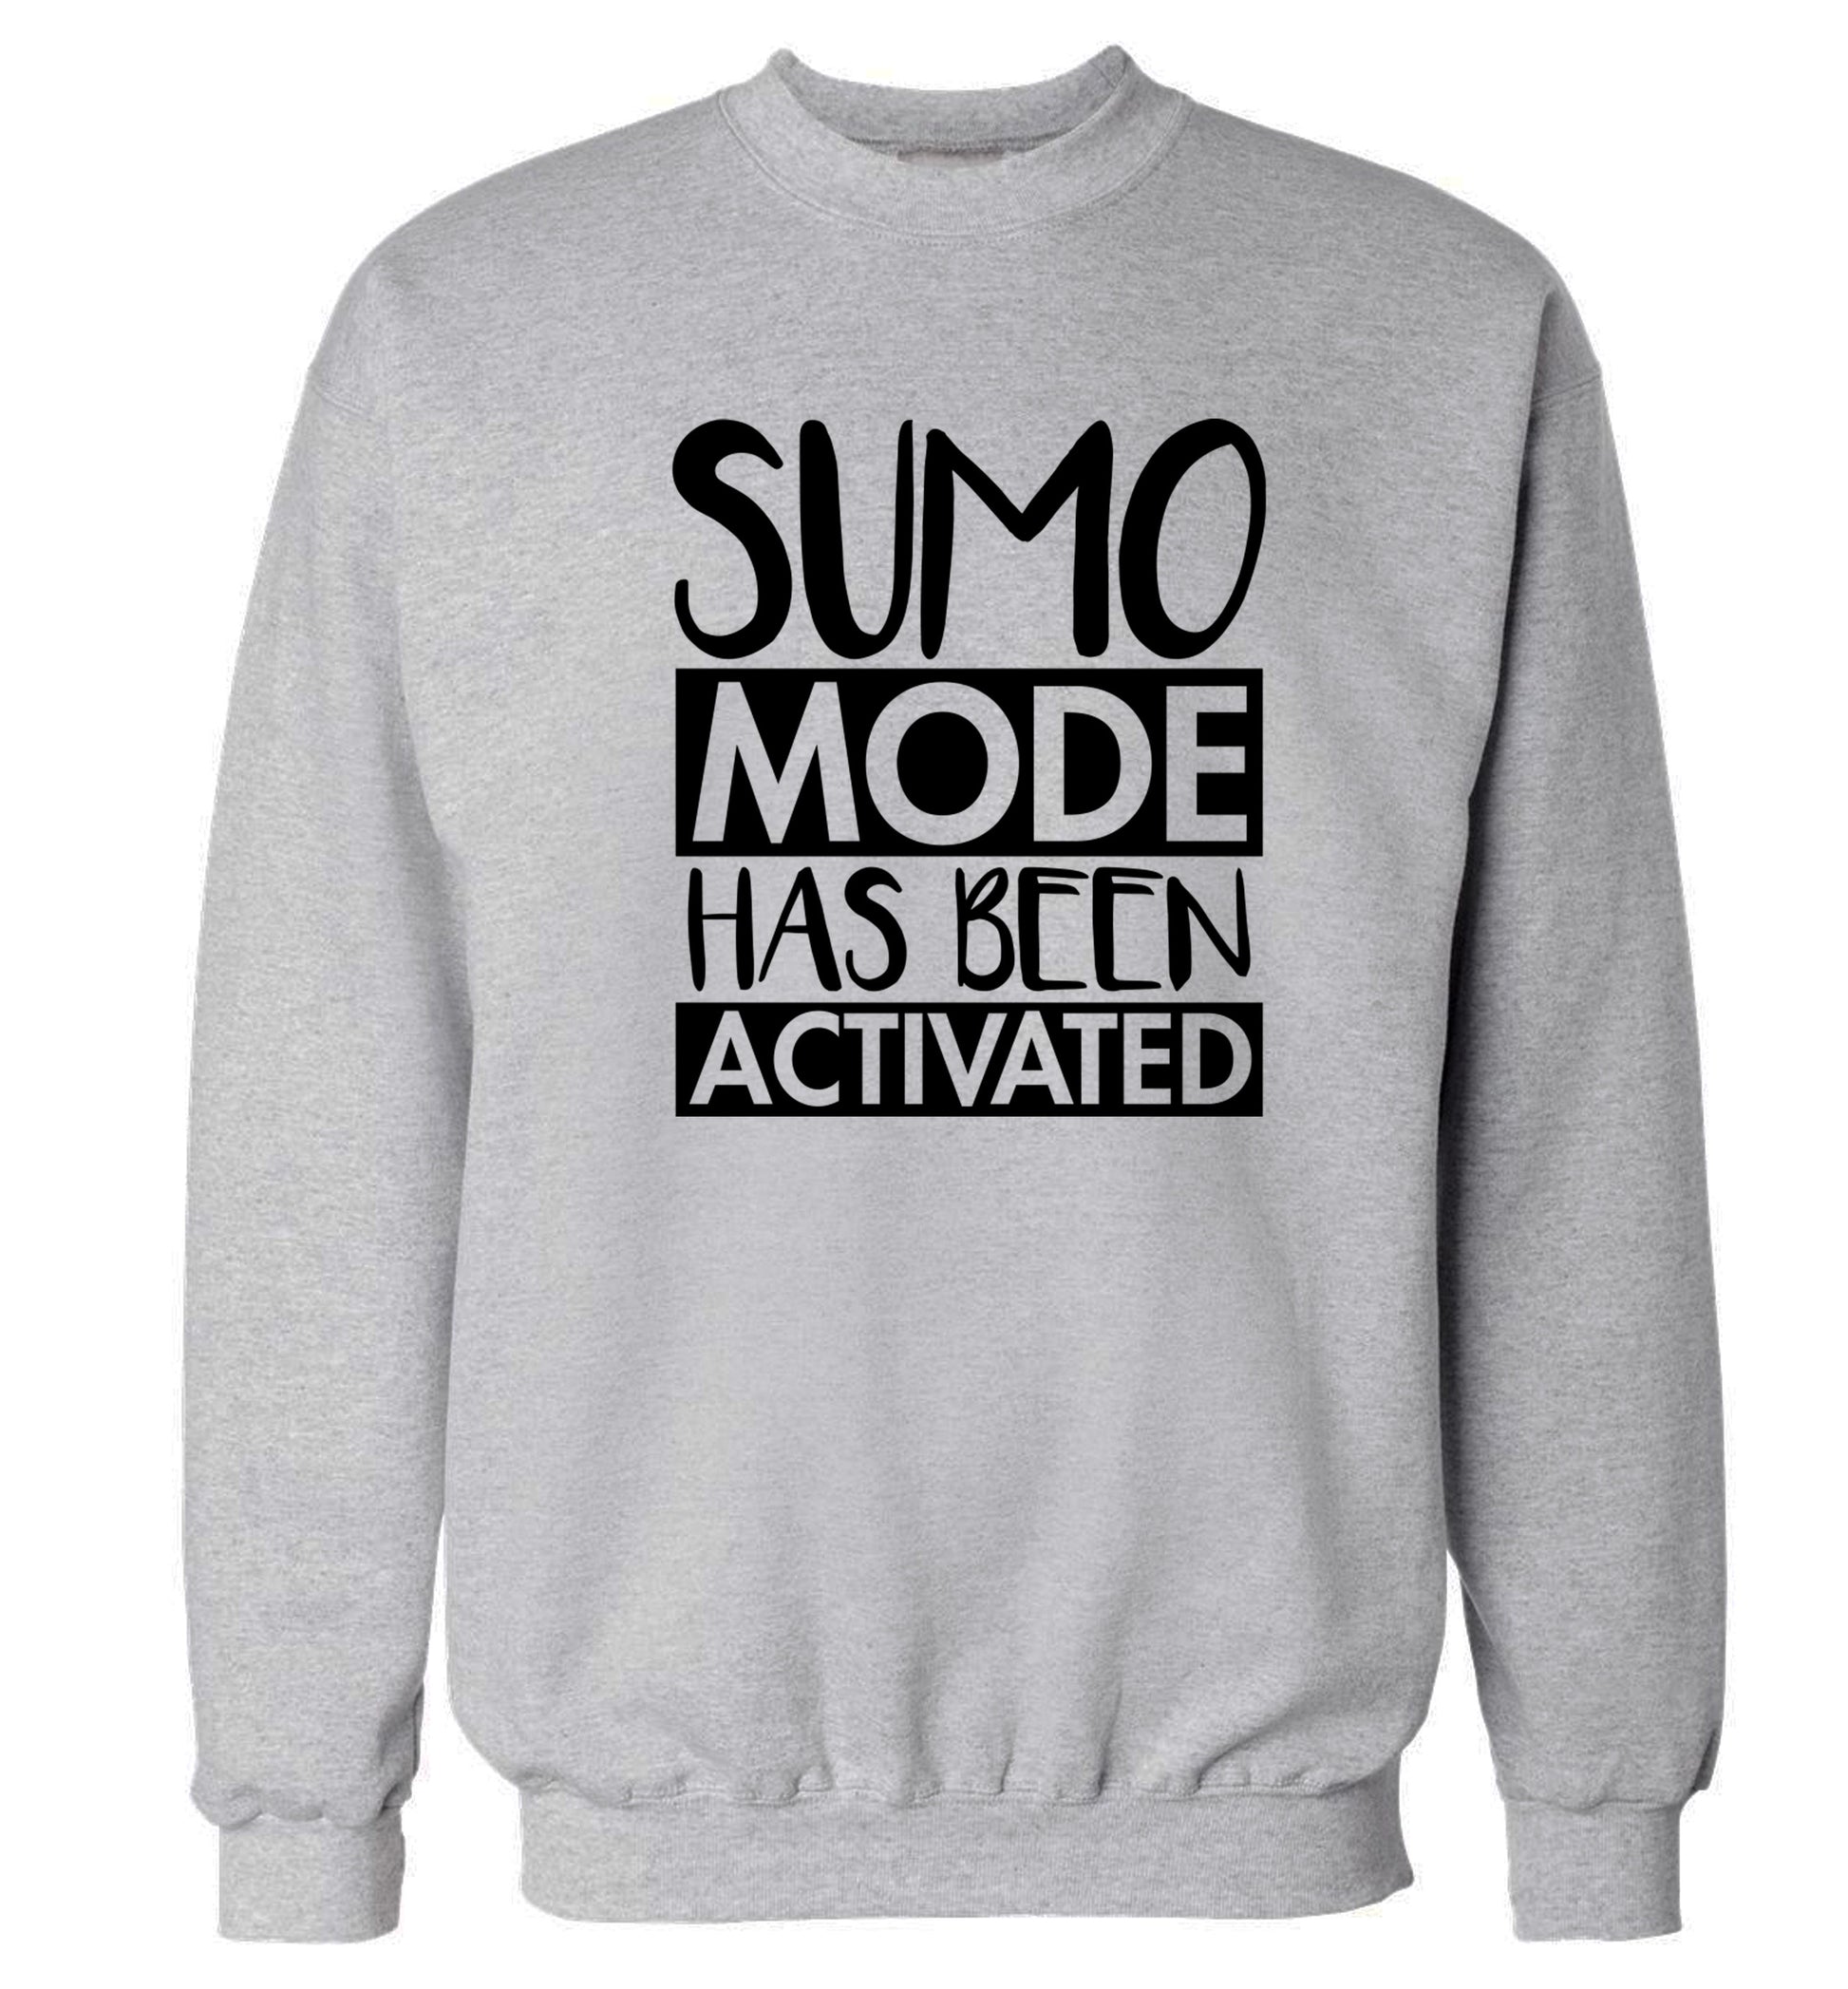 Sumo mode activated Adult's unisex grey Sweater 2XL